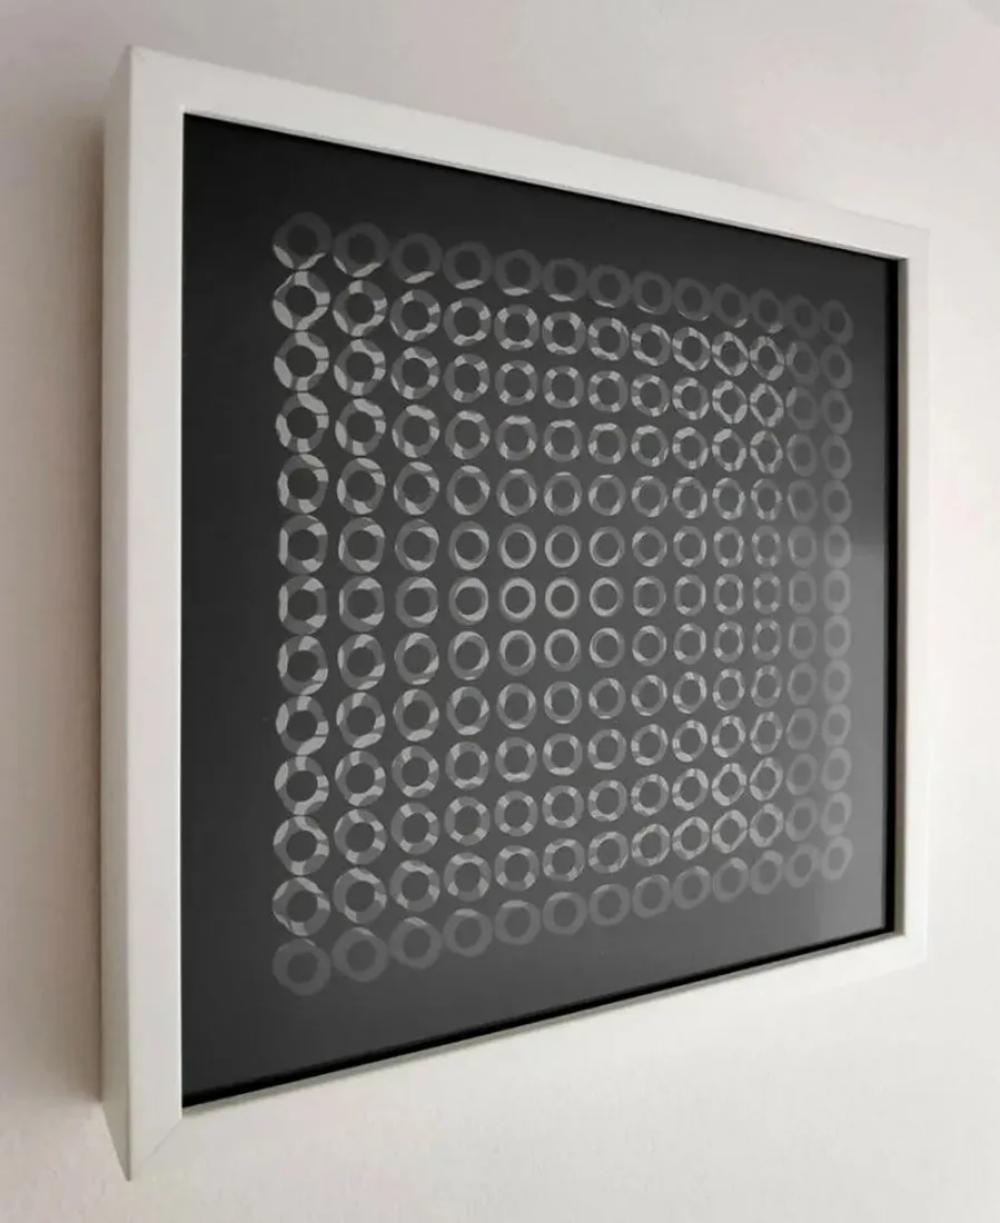 VICTOR VASARELY - OEUVRES PROFONDES CINETIQUES III - 1973